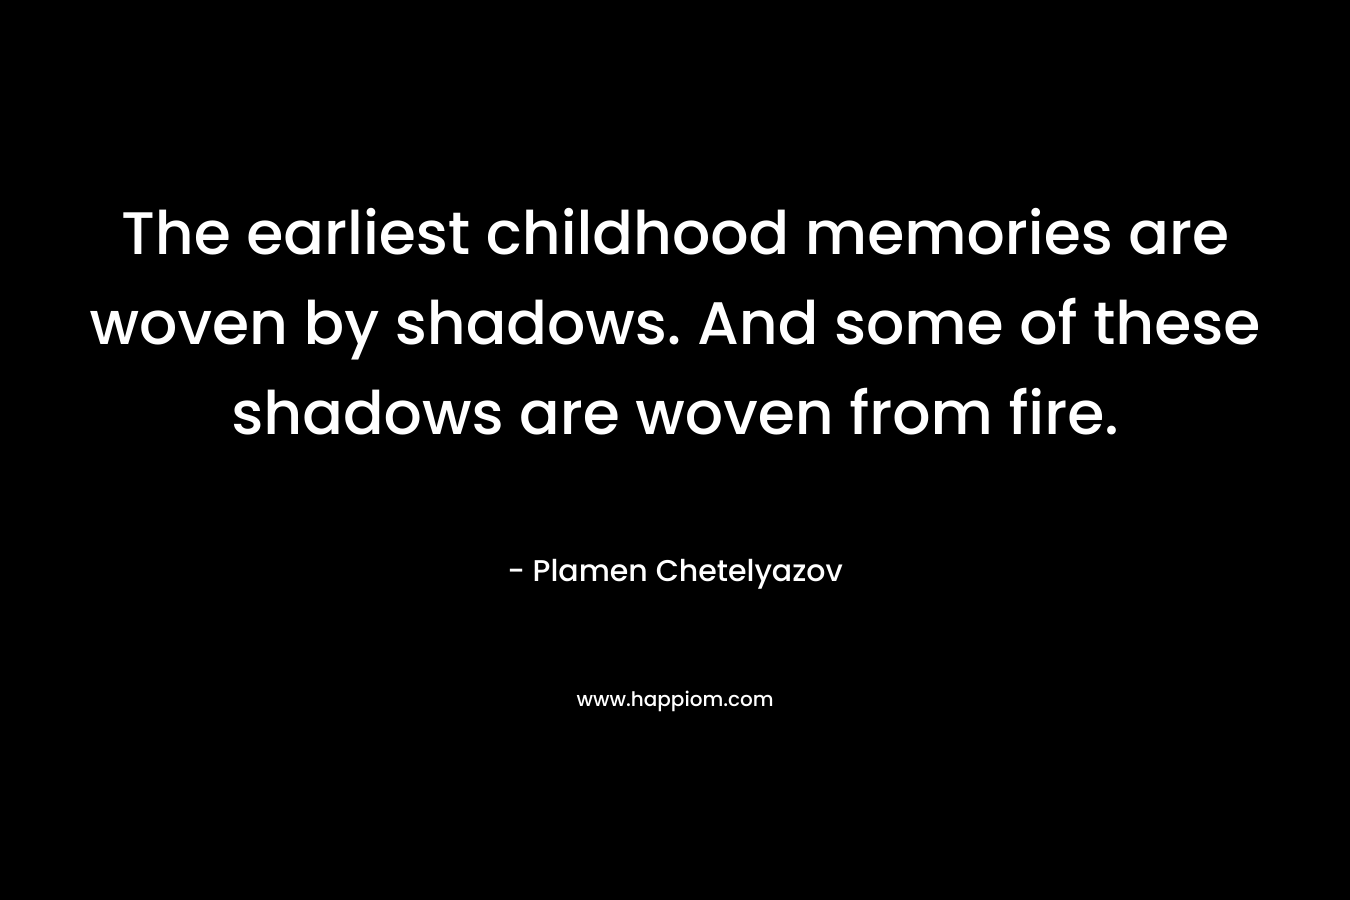 The earliest childhood memories are woven by shadows. And some of these shadows are woven from fire. – Plamen Chetelyazov